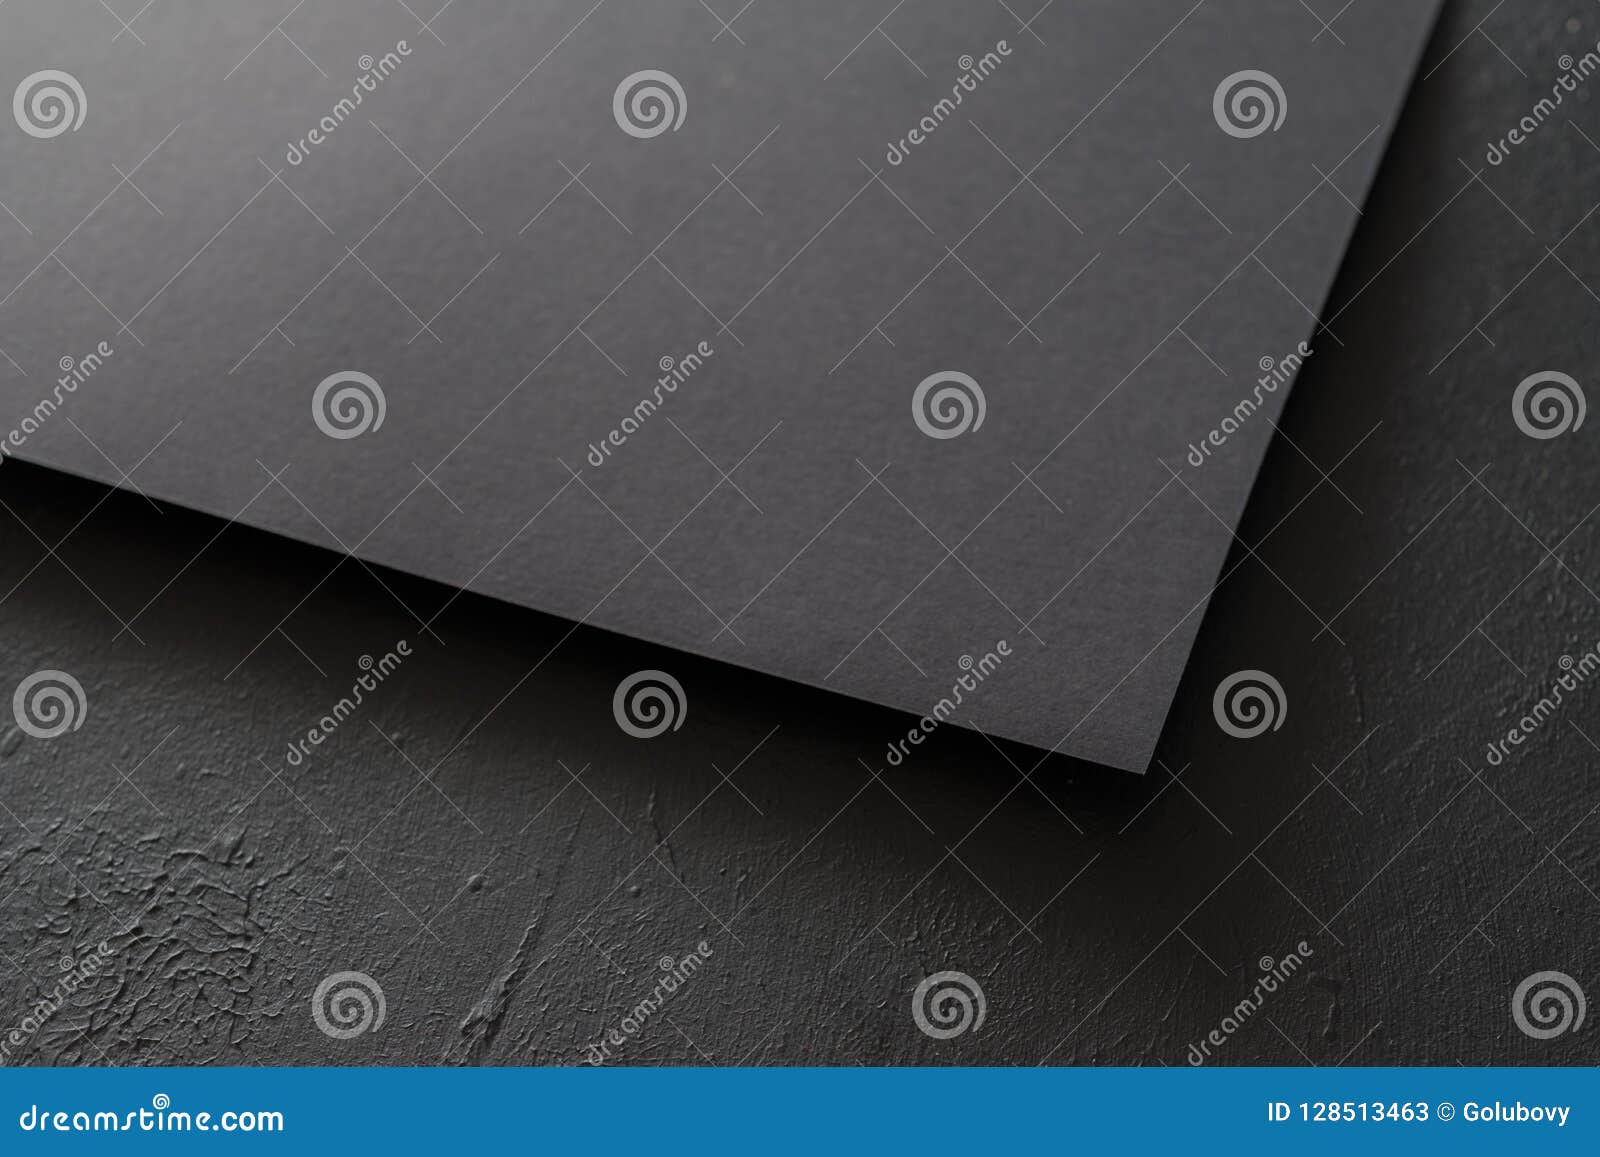 Construction Paper Texture Geometric Background Stock Image - Image of  paper, layers: 128513463